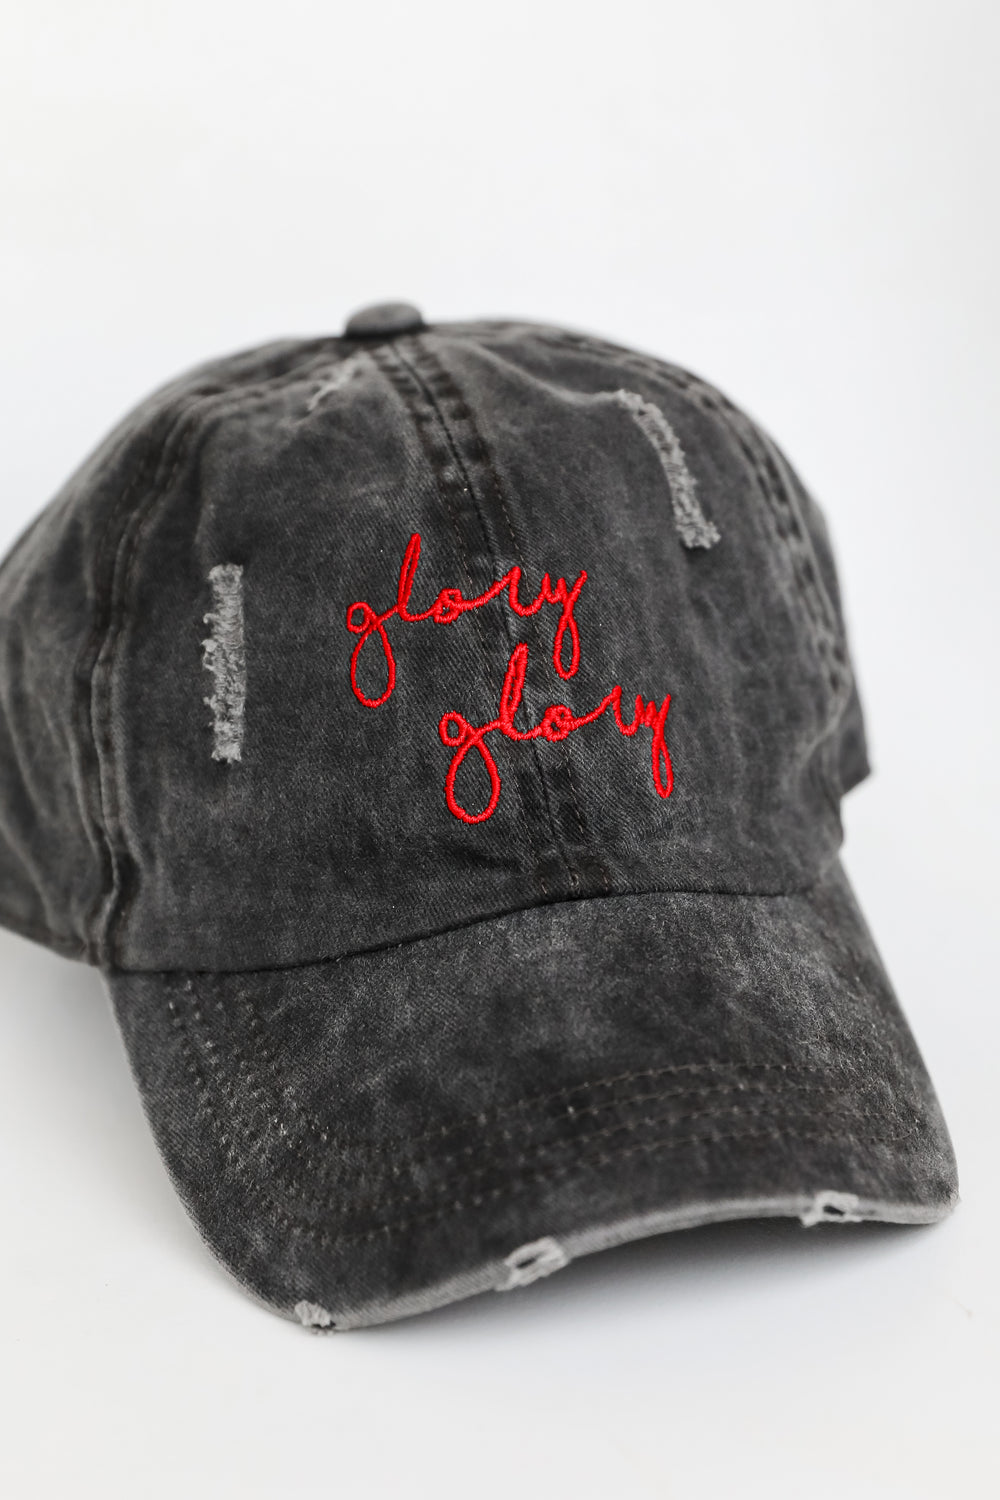 Glory Glory Script Embroidered Hat flat lay uga hats online